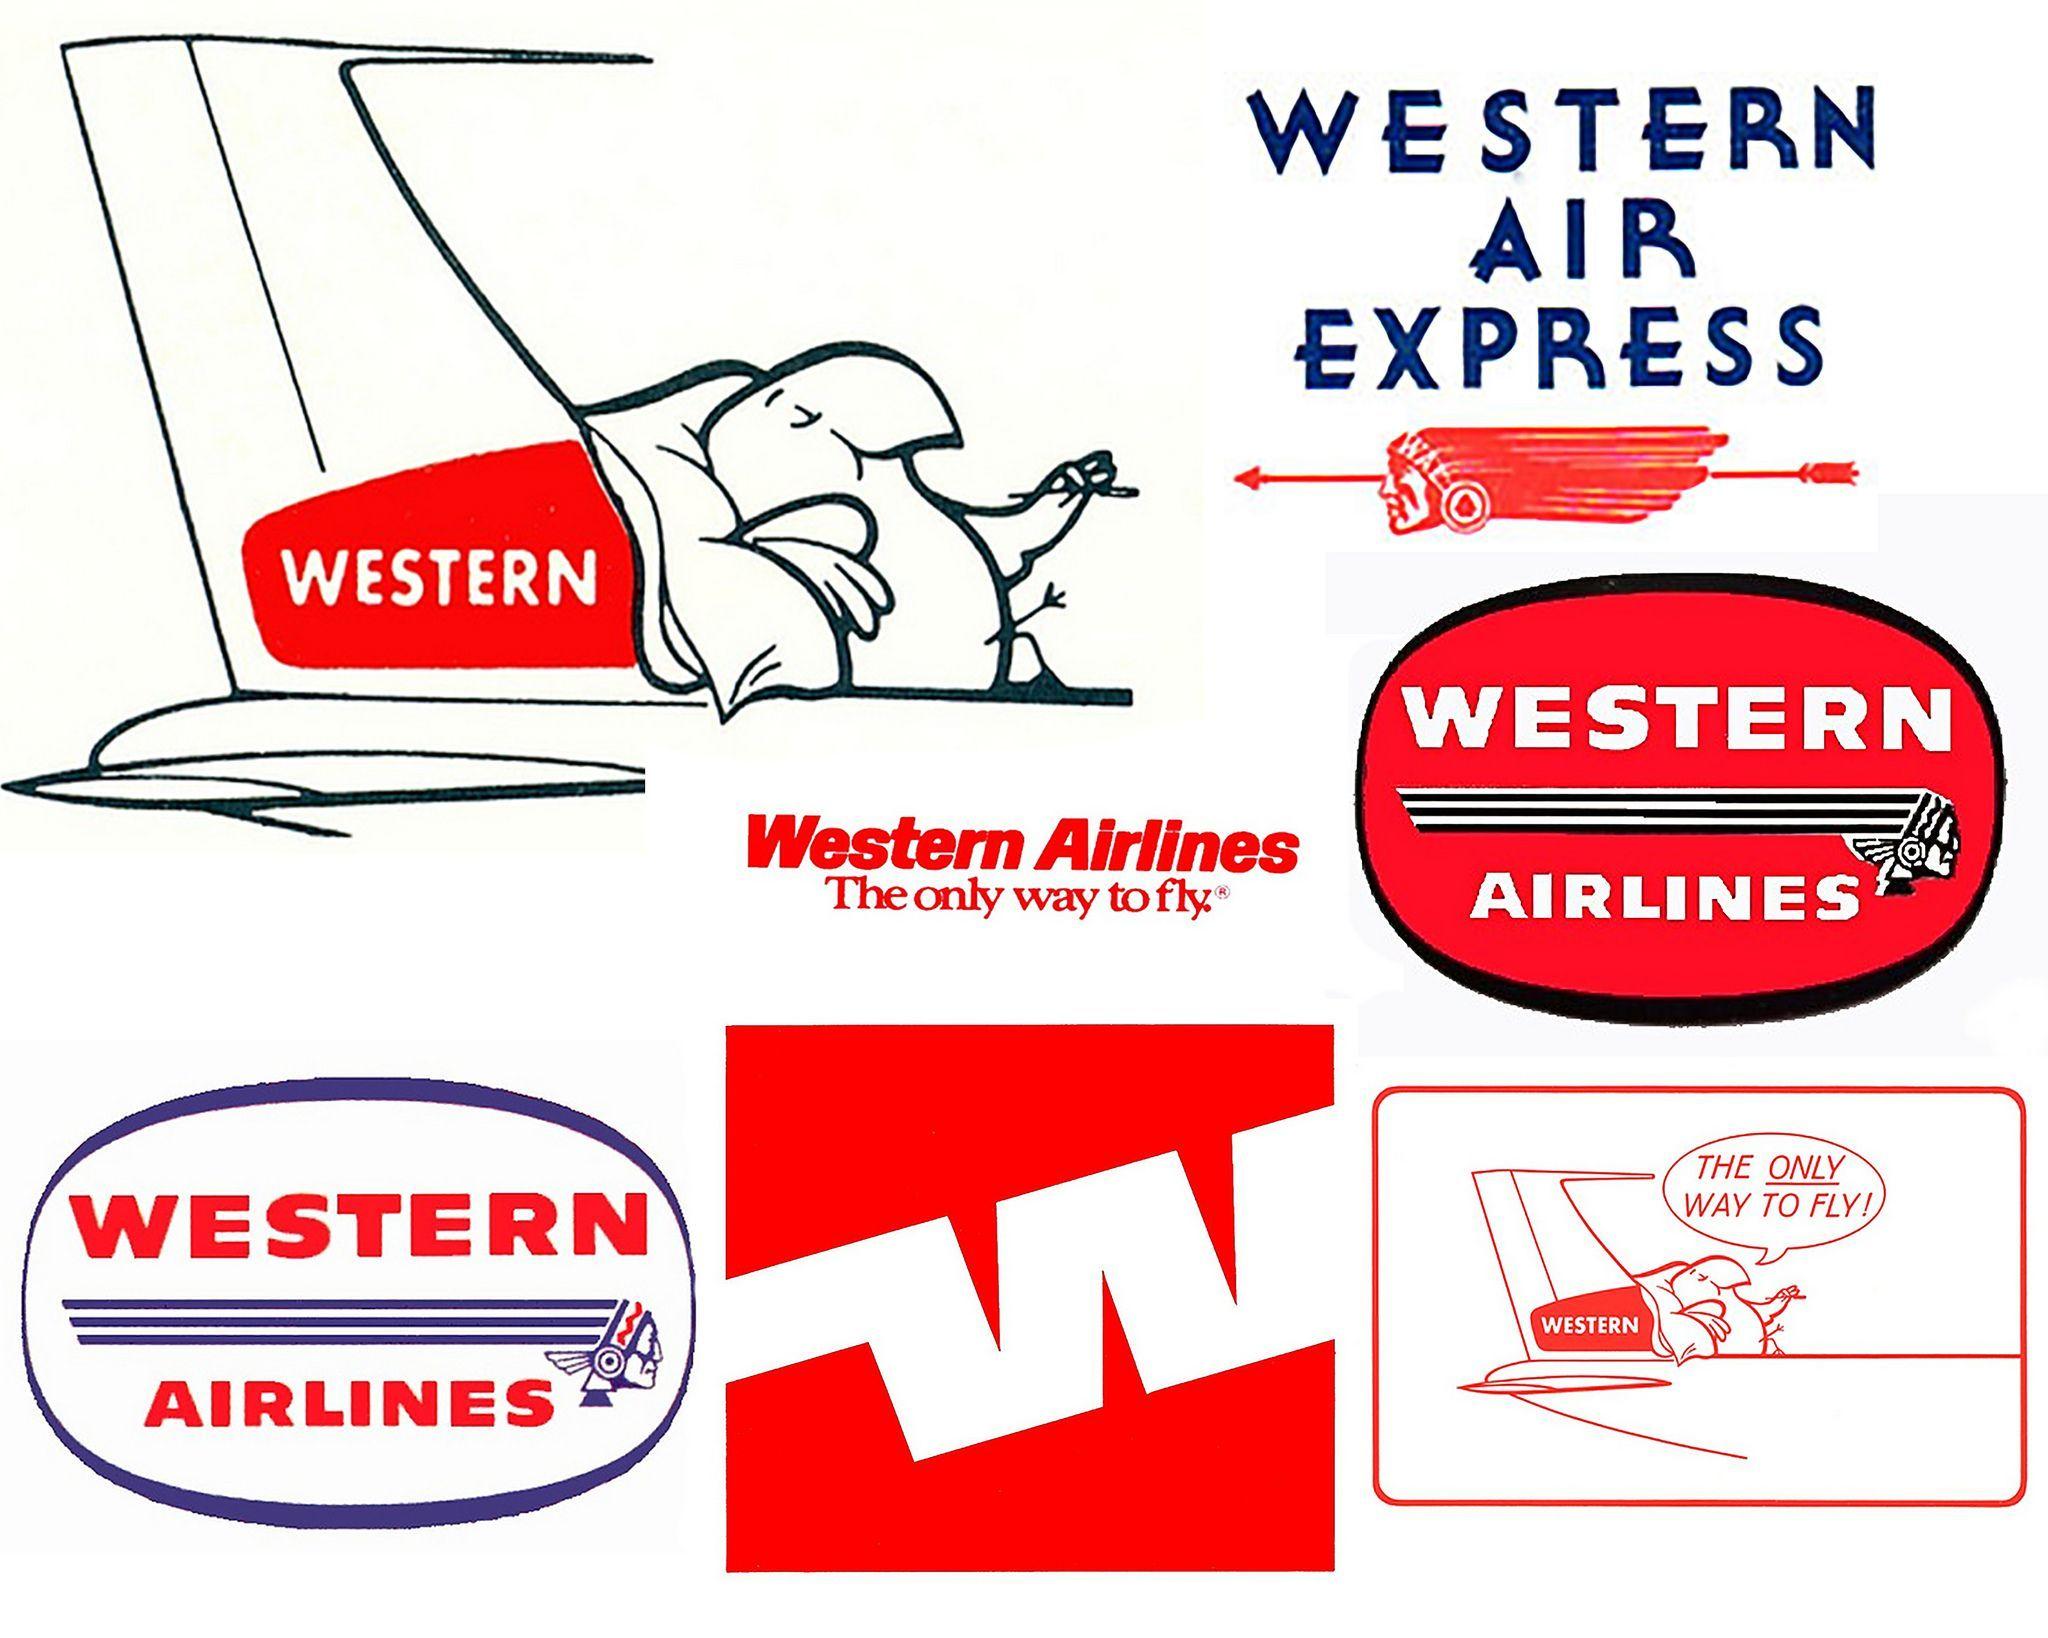 Major Airline Logo - Western Airlines Logos & VIB. Airlines and Airline Industry